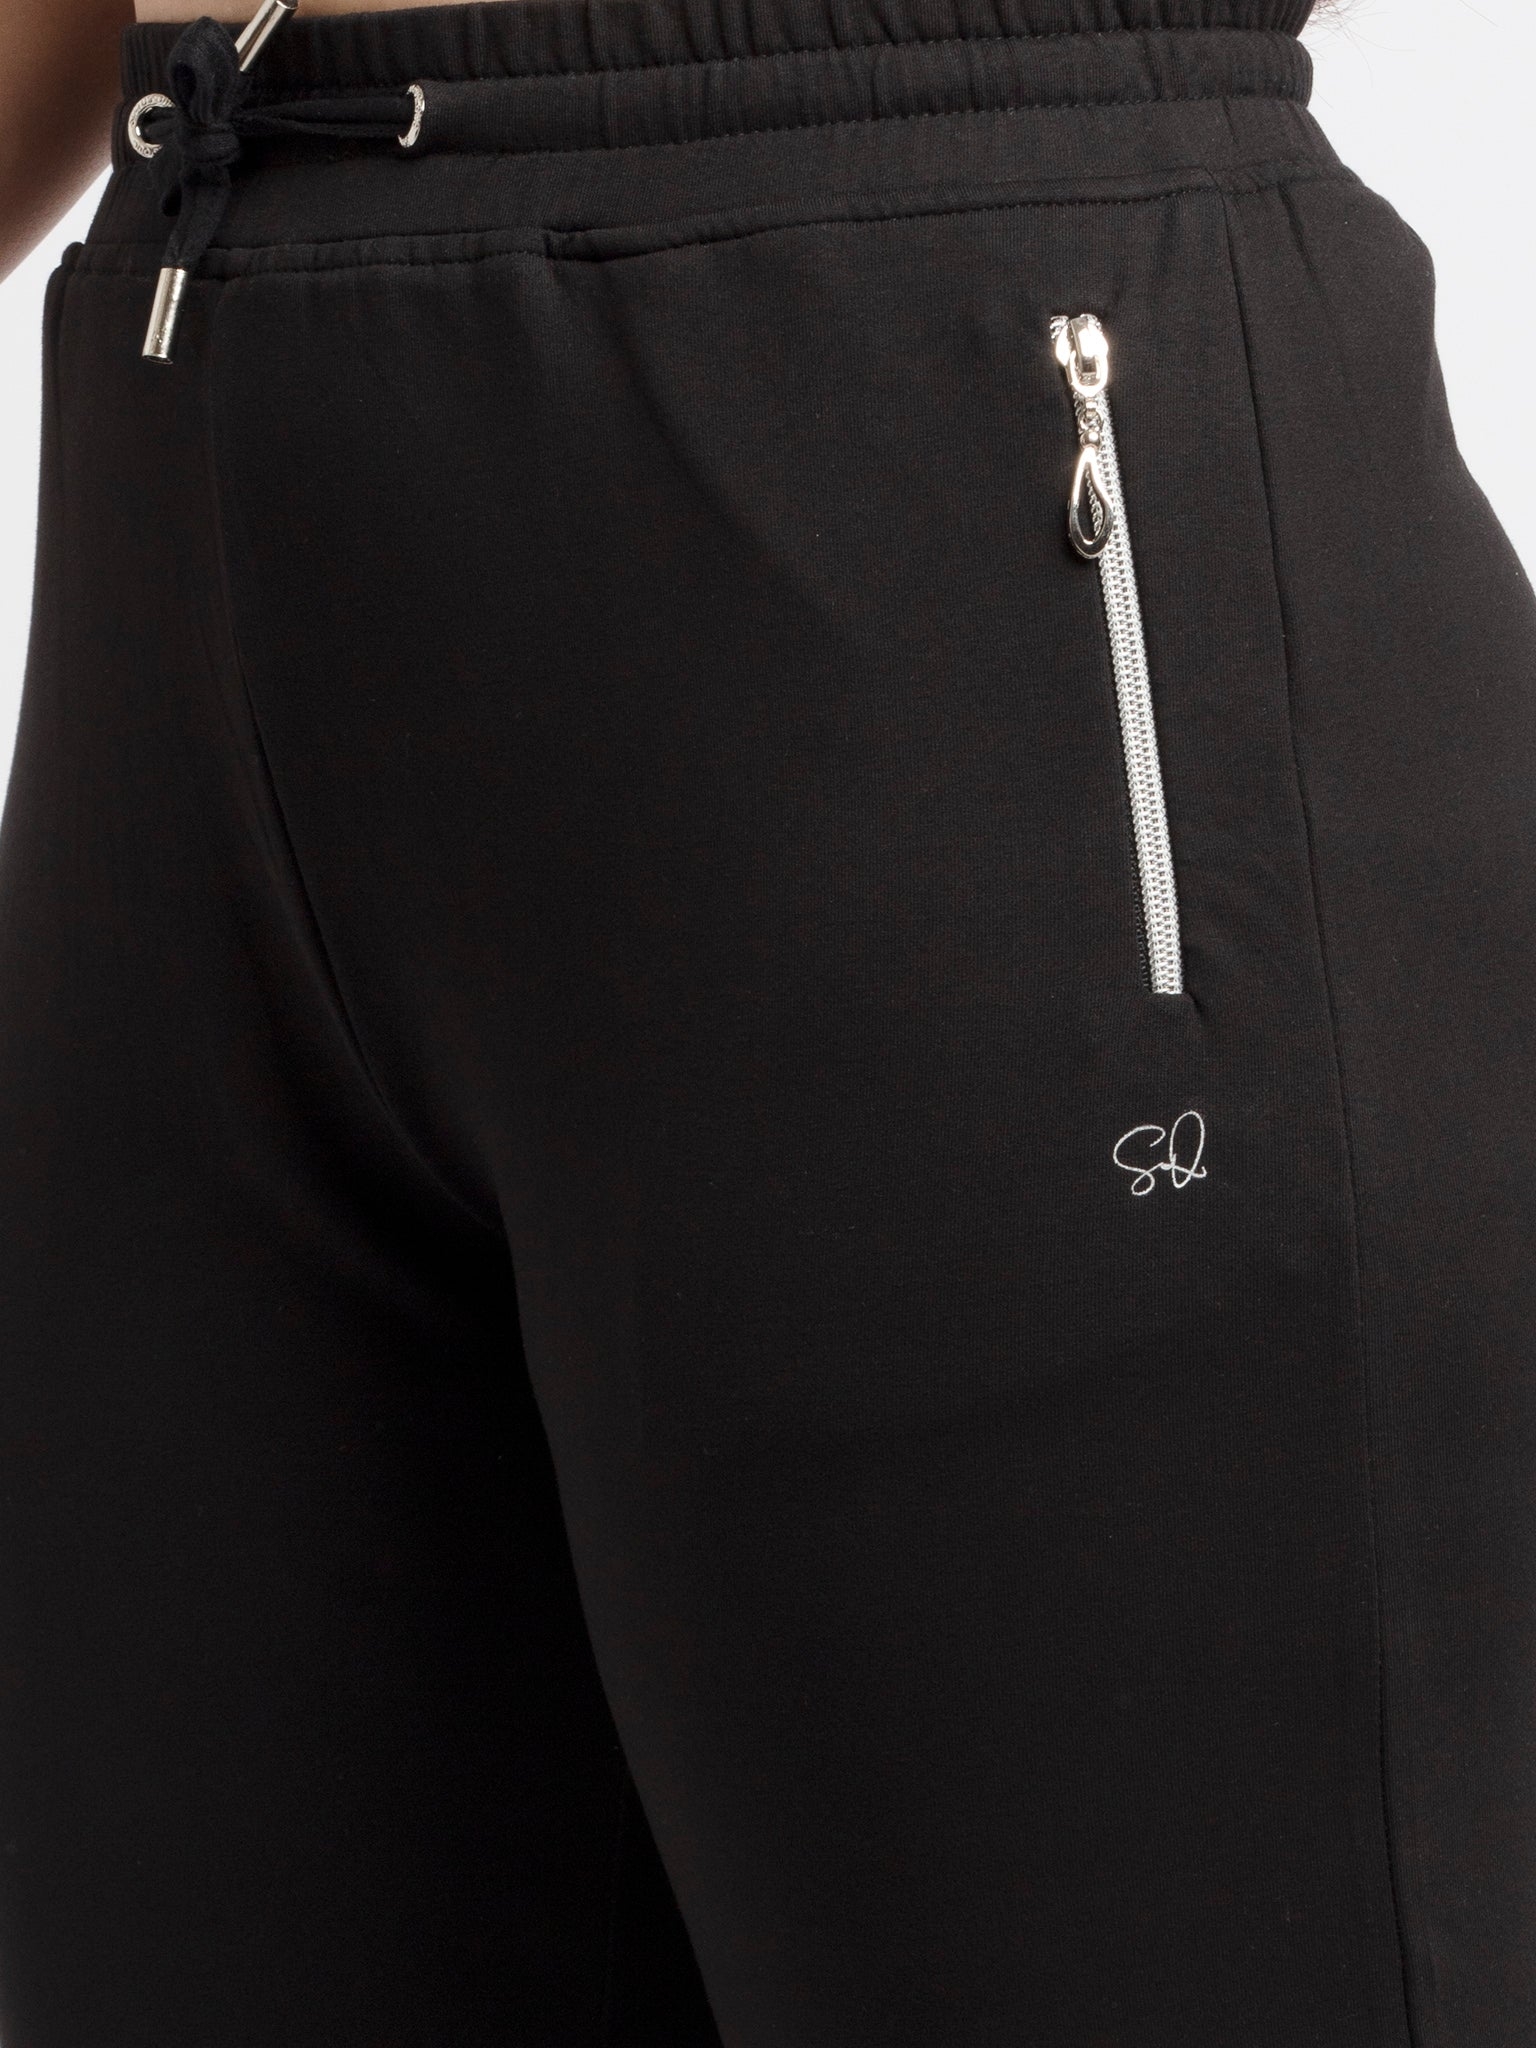 Status Quo | Women'ss Full length Solid Joggers 3